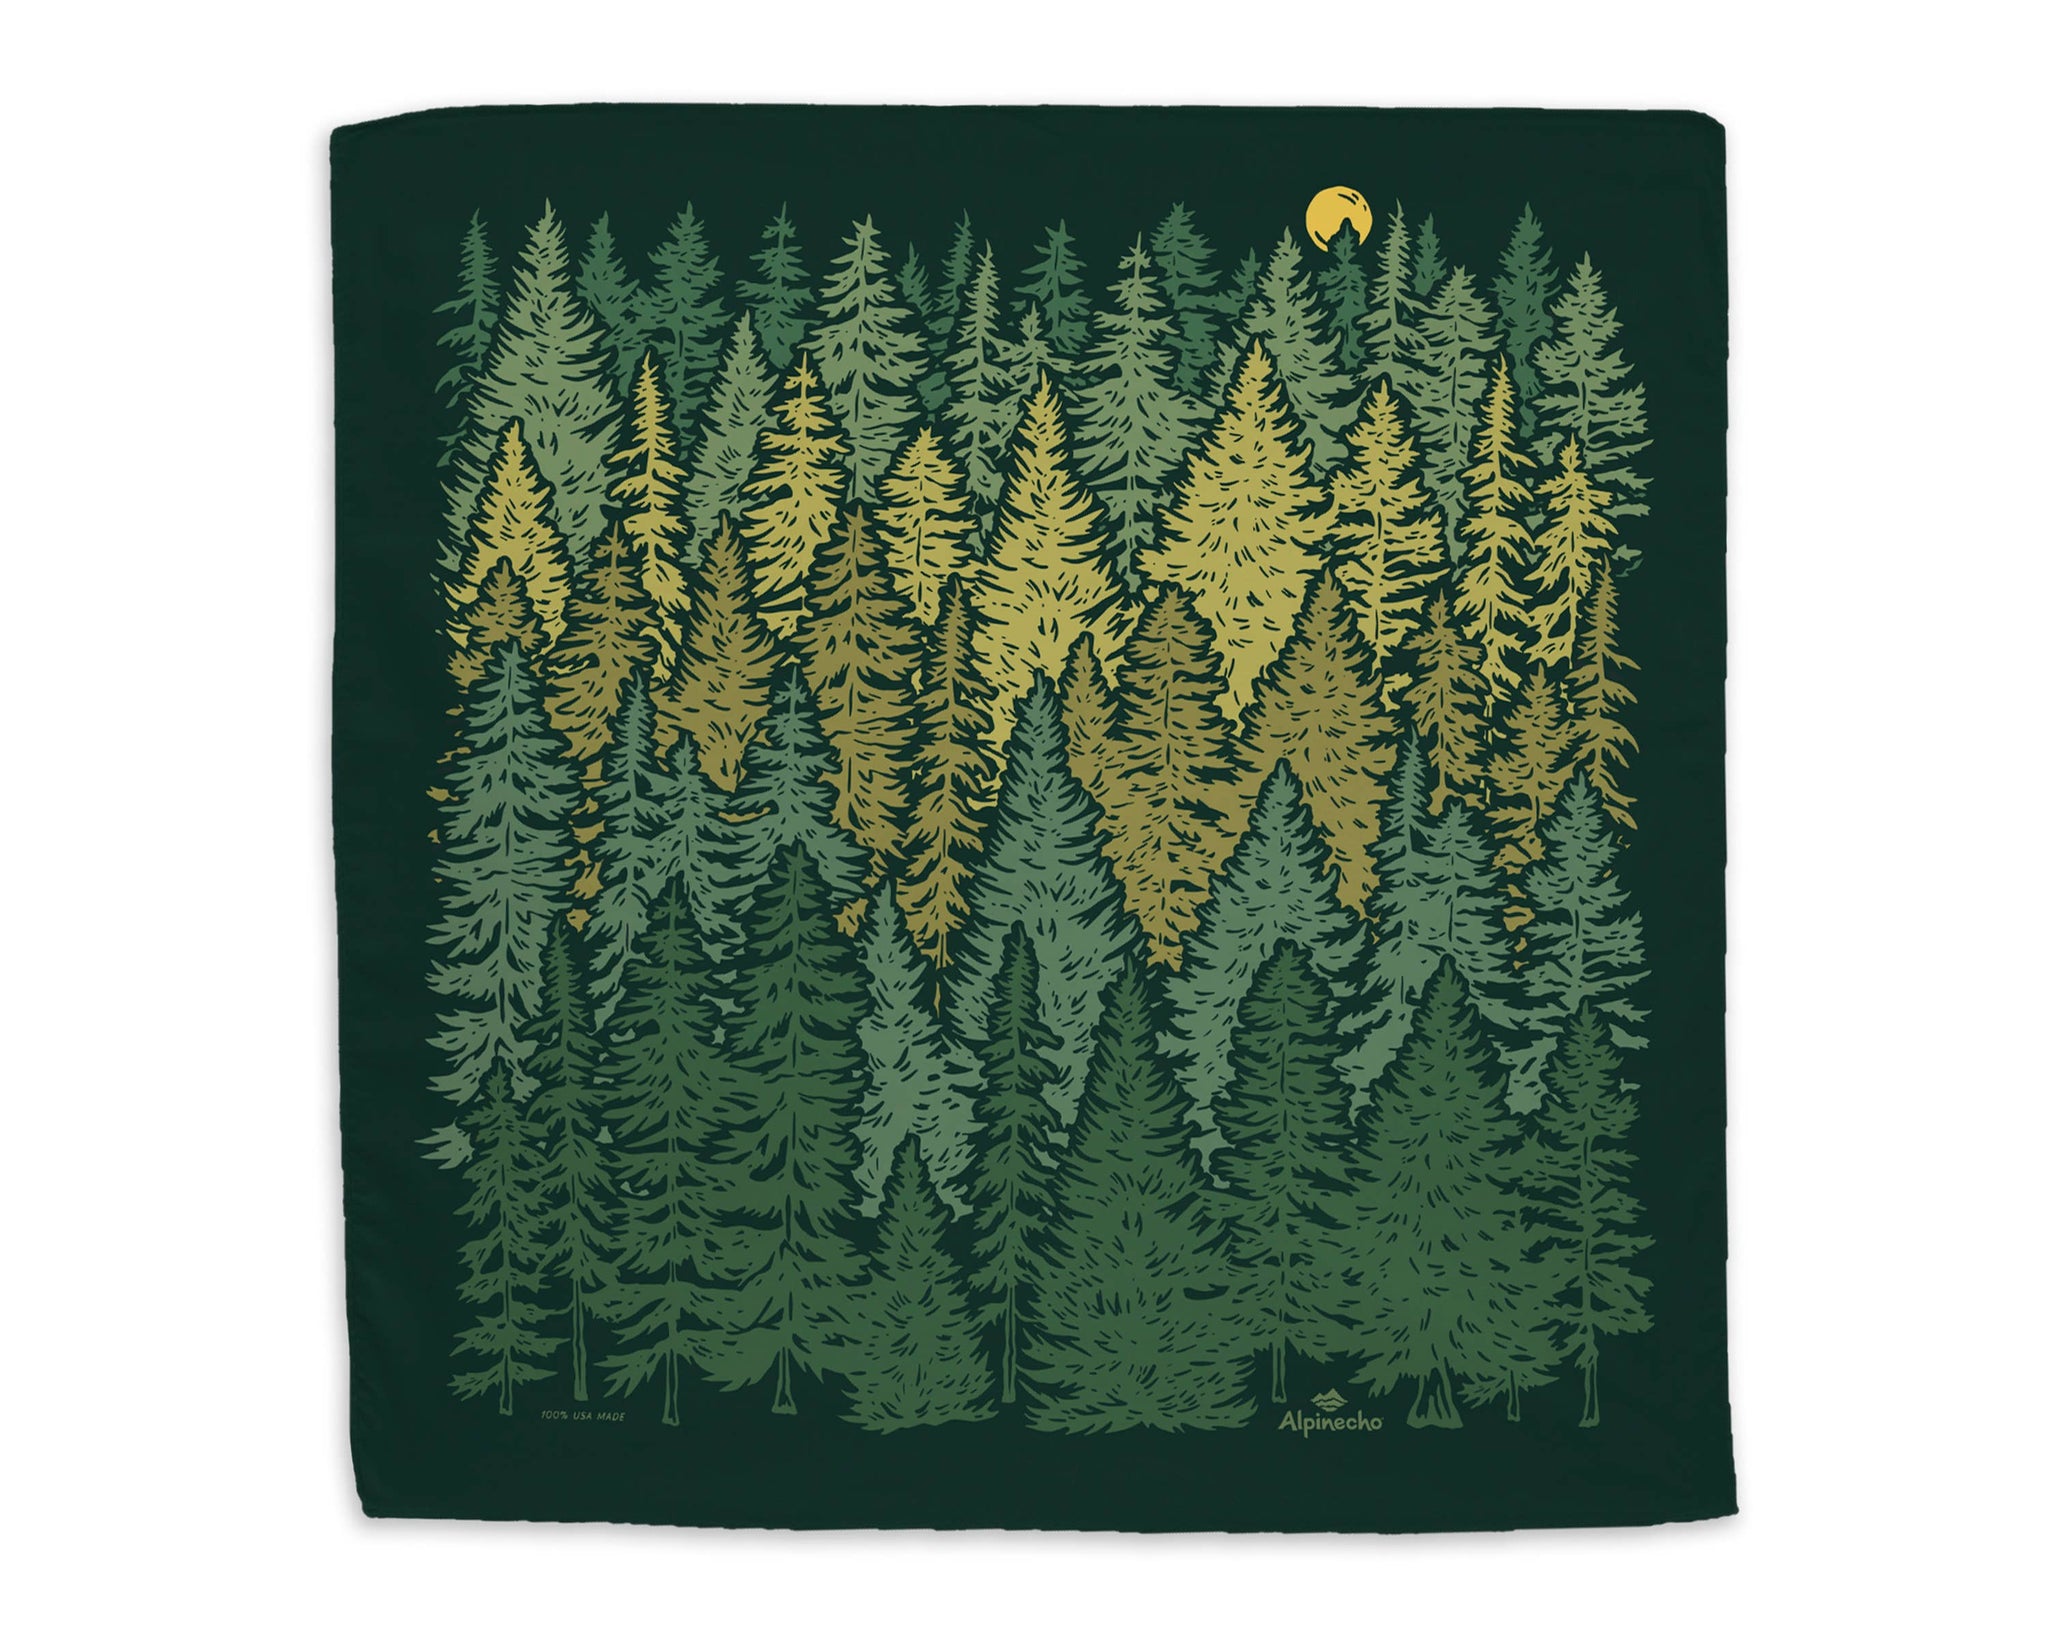 Alpinecho - Into The Forest Quick-Dry Bandana